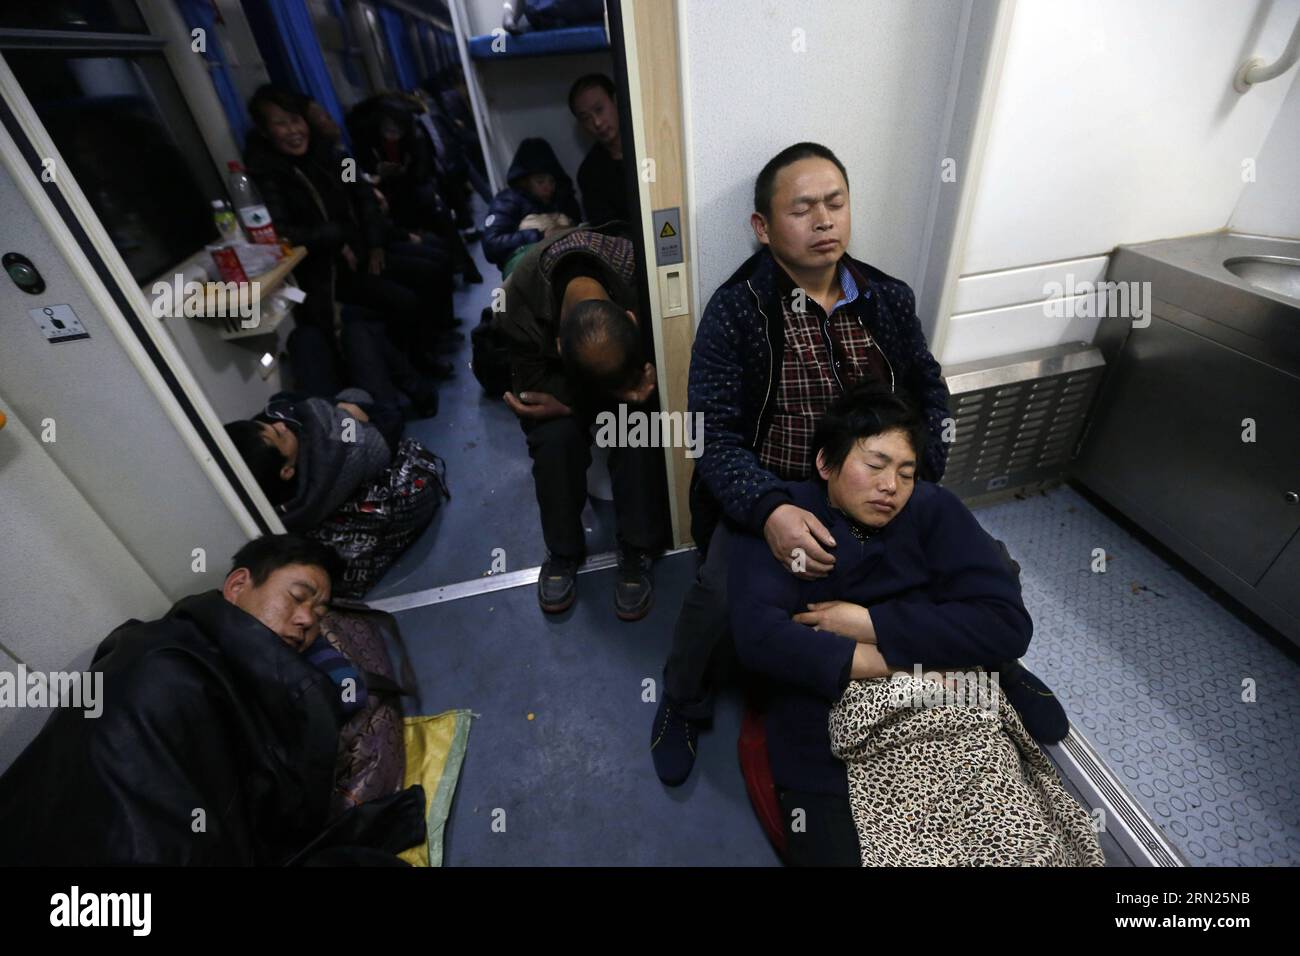 Passengers have a sleep on the ground of train 3663, which runs from east China s Shanghai to Chengdu, capital of southwest China s Sichuan Province, on Sept. 9, 2015. The Spring Festival, or the Chinese lunar New Year which starts from Feb. 19 this year, is known as the world s biggest migration, with millions of people traveling vast distances for family reunions. ) (lfj) CHINA-SPRING FESTIVAL-HOME RETURNING (CN) DingxTing PUBLICATIONxNOTxINxCHN   Passengers have a Sleep ON The Ground of Train 3663 Which runs from East China S Shanghai to Chengdu Capital of Southwest China S Sichuan Province Stock Photo